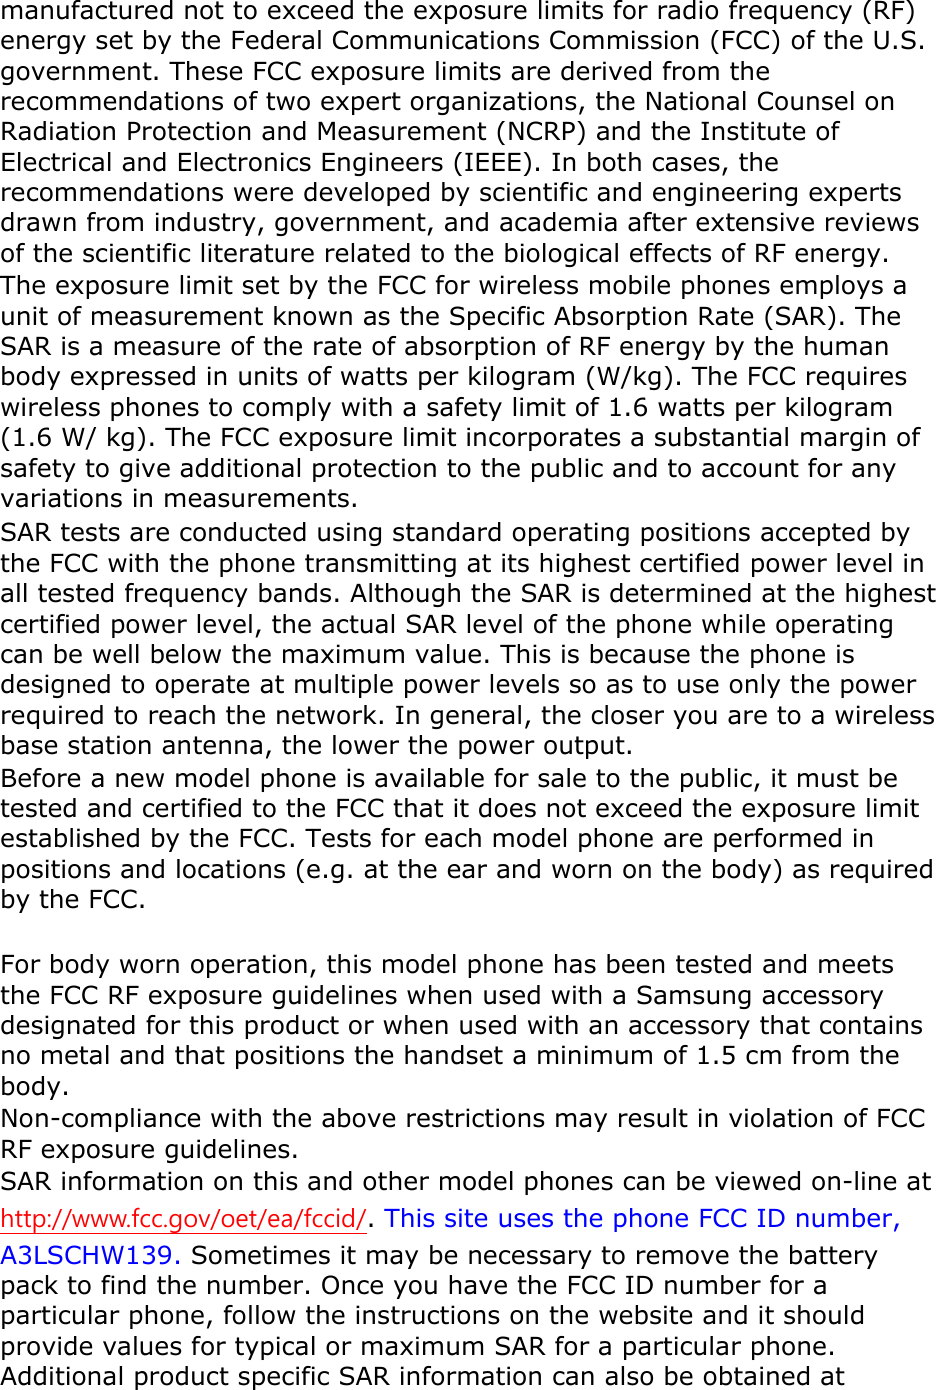 Page 7 of Samsung Electronics Co SCHW139 Cellular CDMA Phone with Bluetooth User Manual